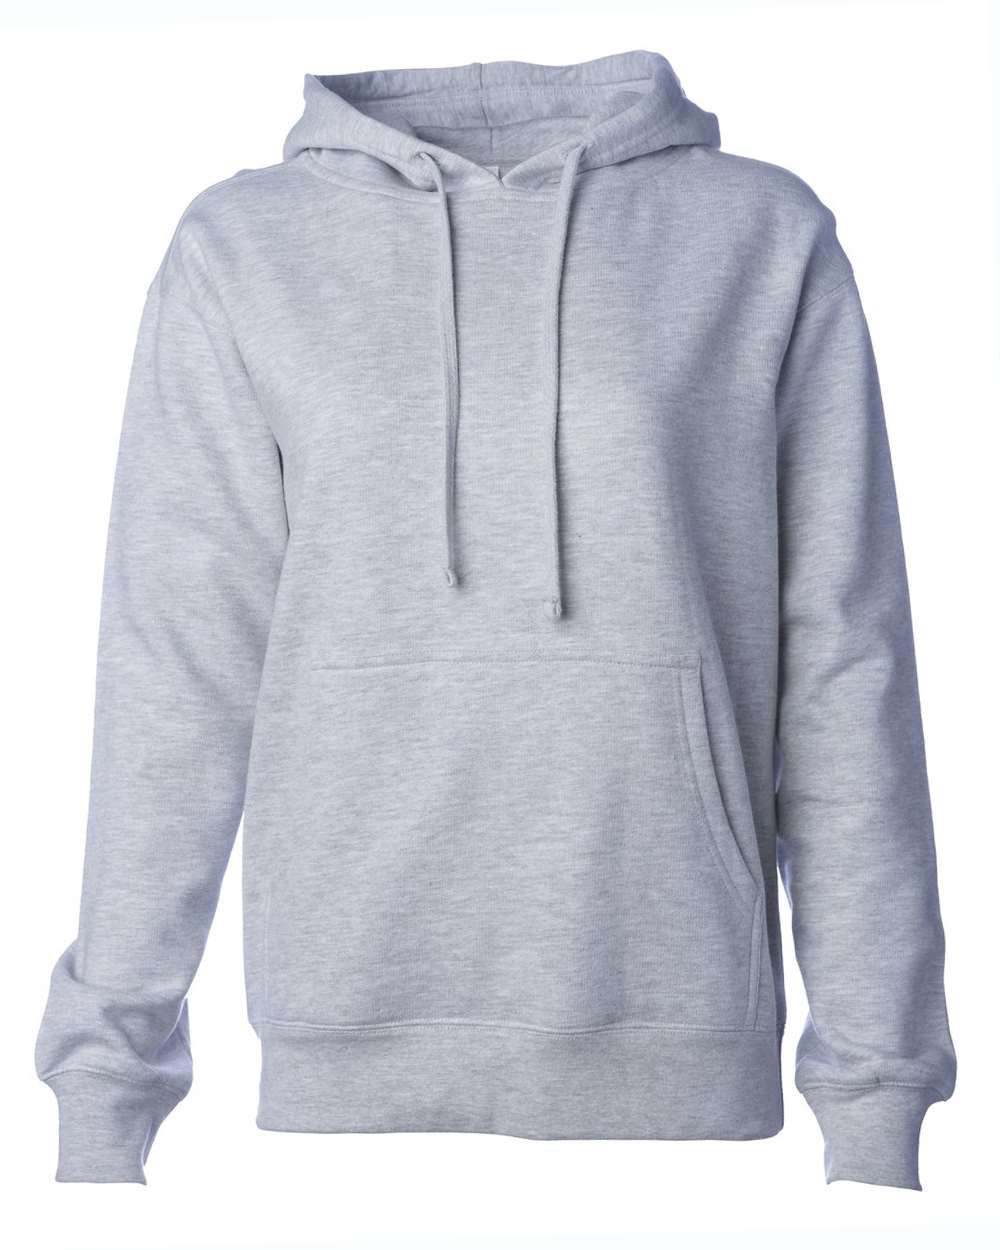 Independent Trading Co. - Women's Midweight Hooded Sweatshirt